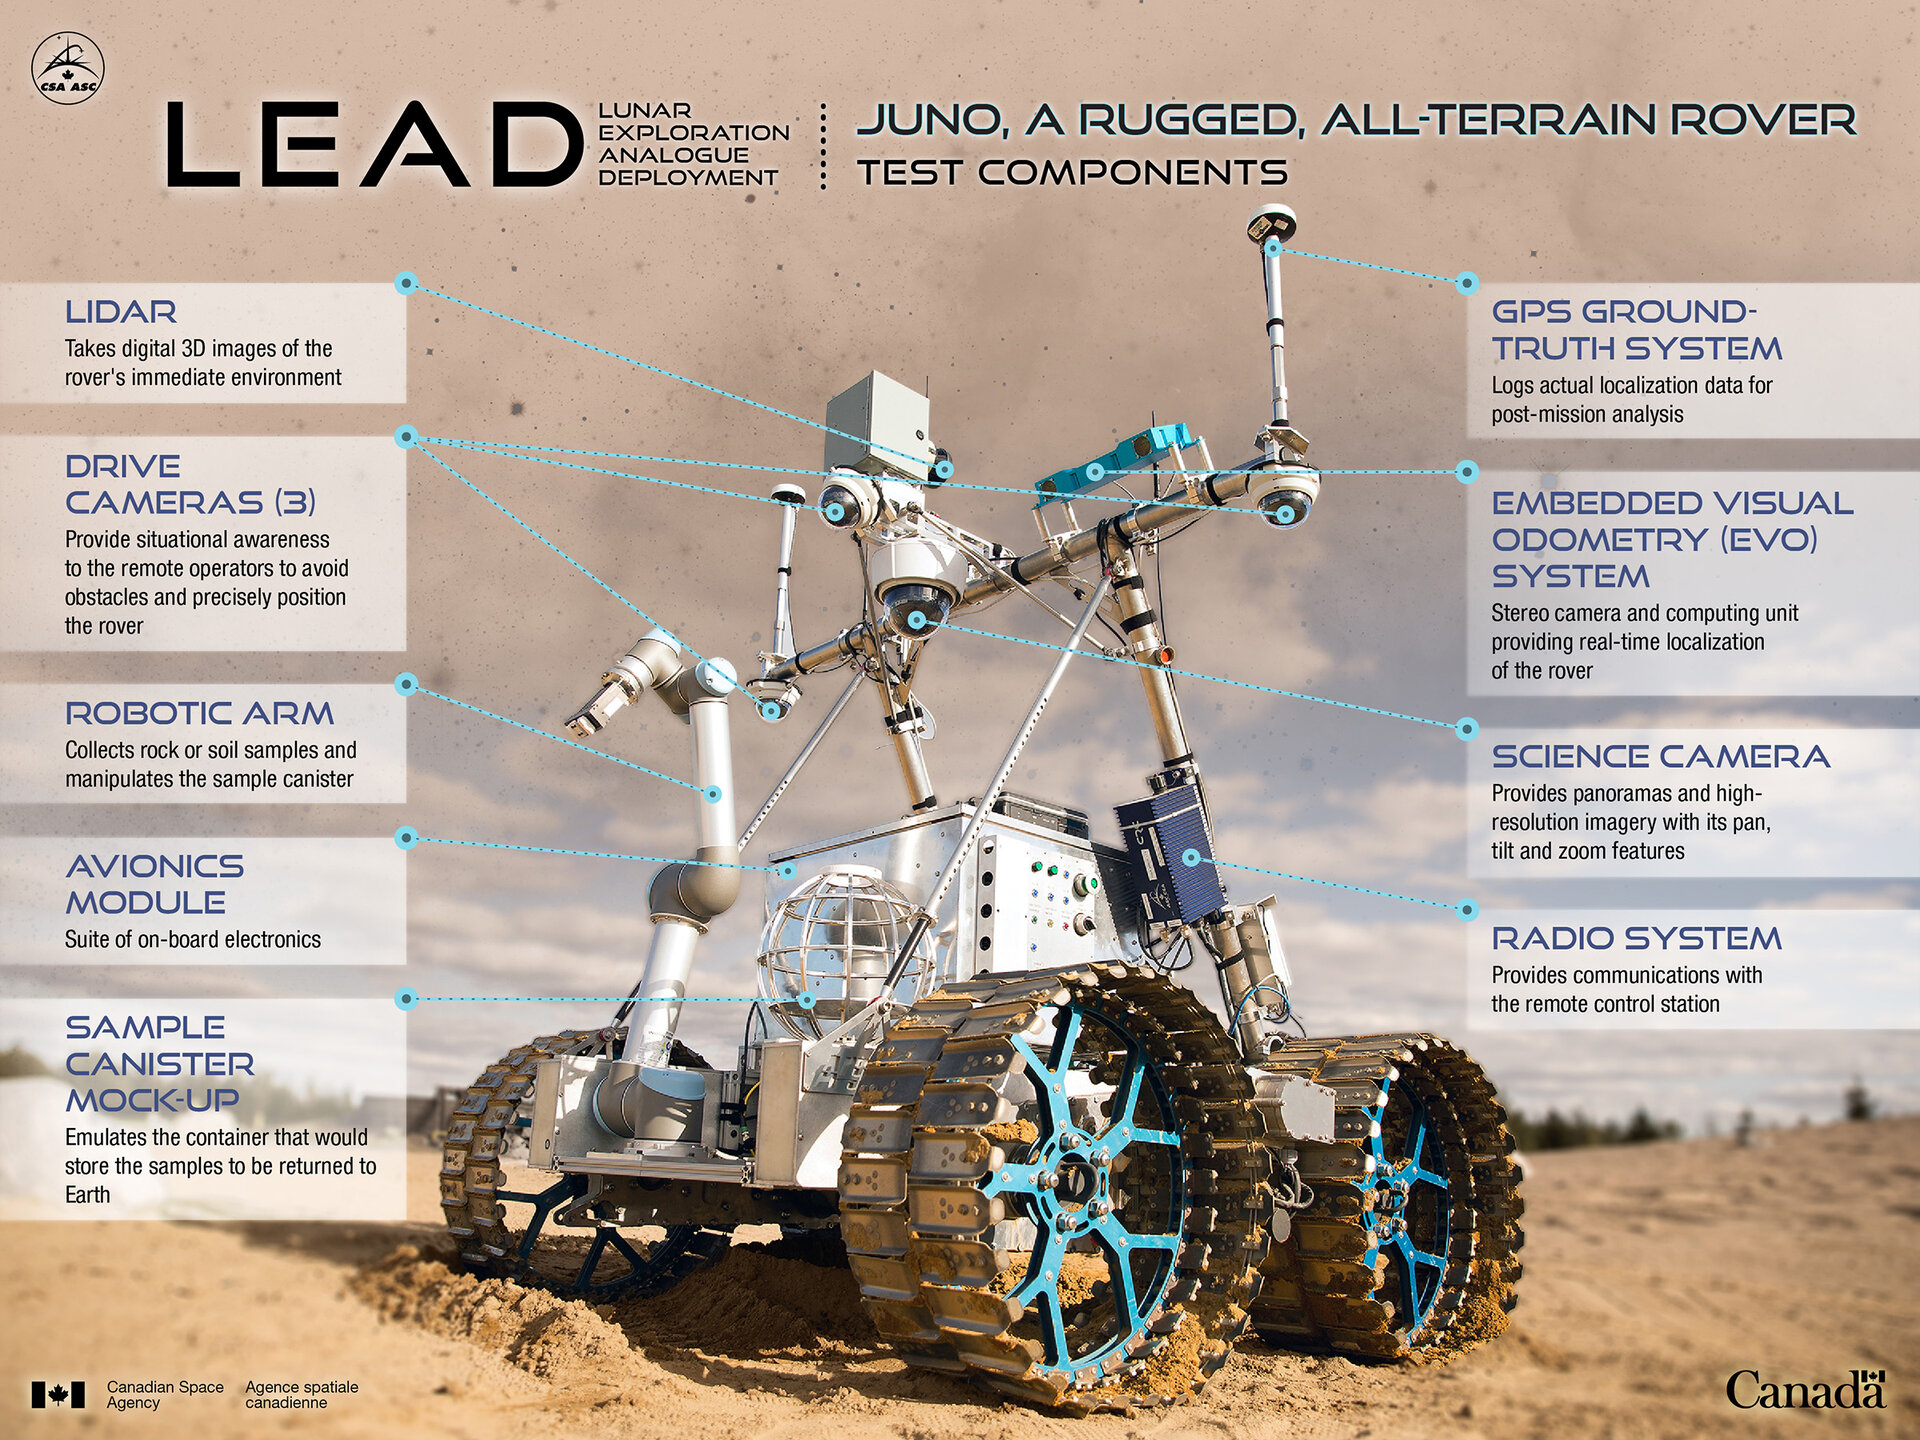 The Canadian Space Agency's Juno rover